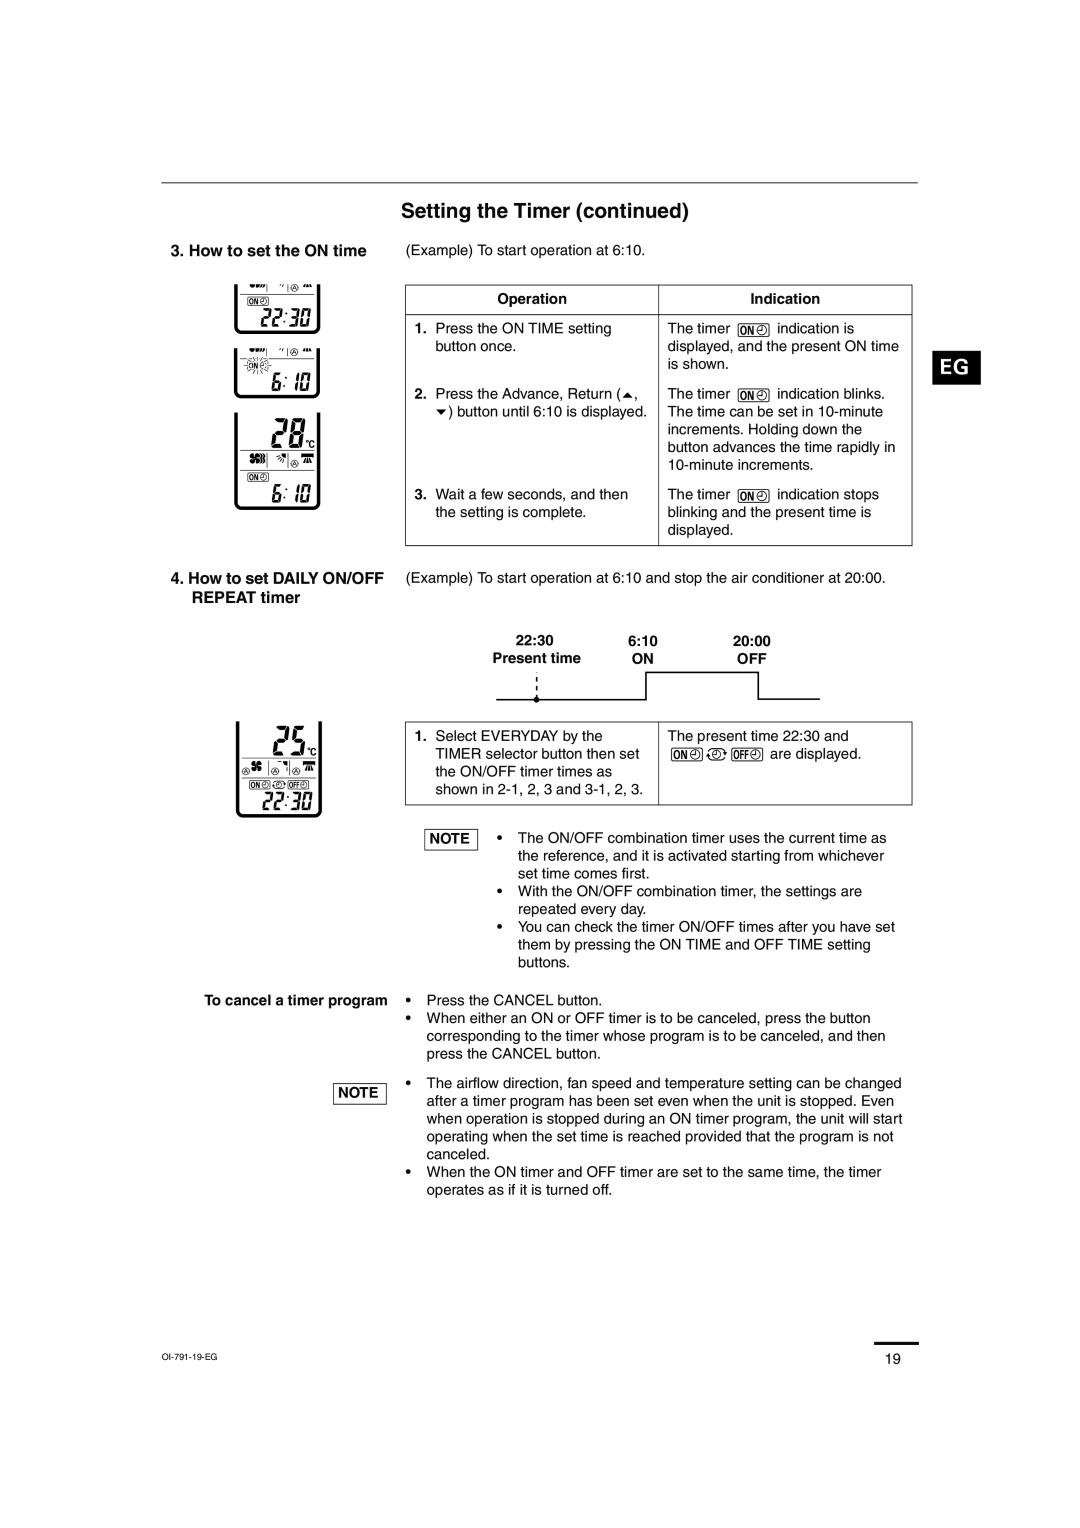 Sanyo SAP-KRV94EHDX service manual Setting the Timer continued, REPEAT timer 